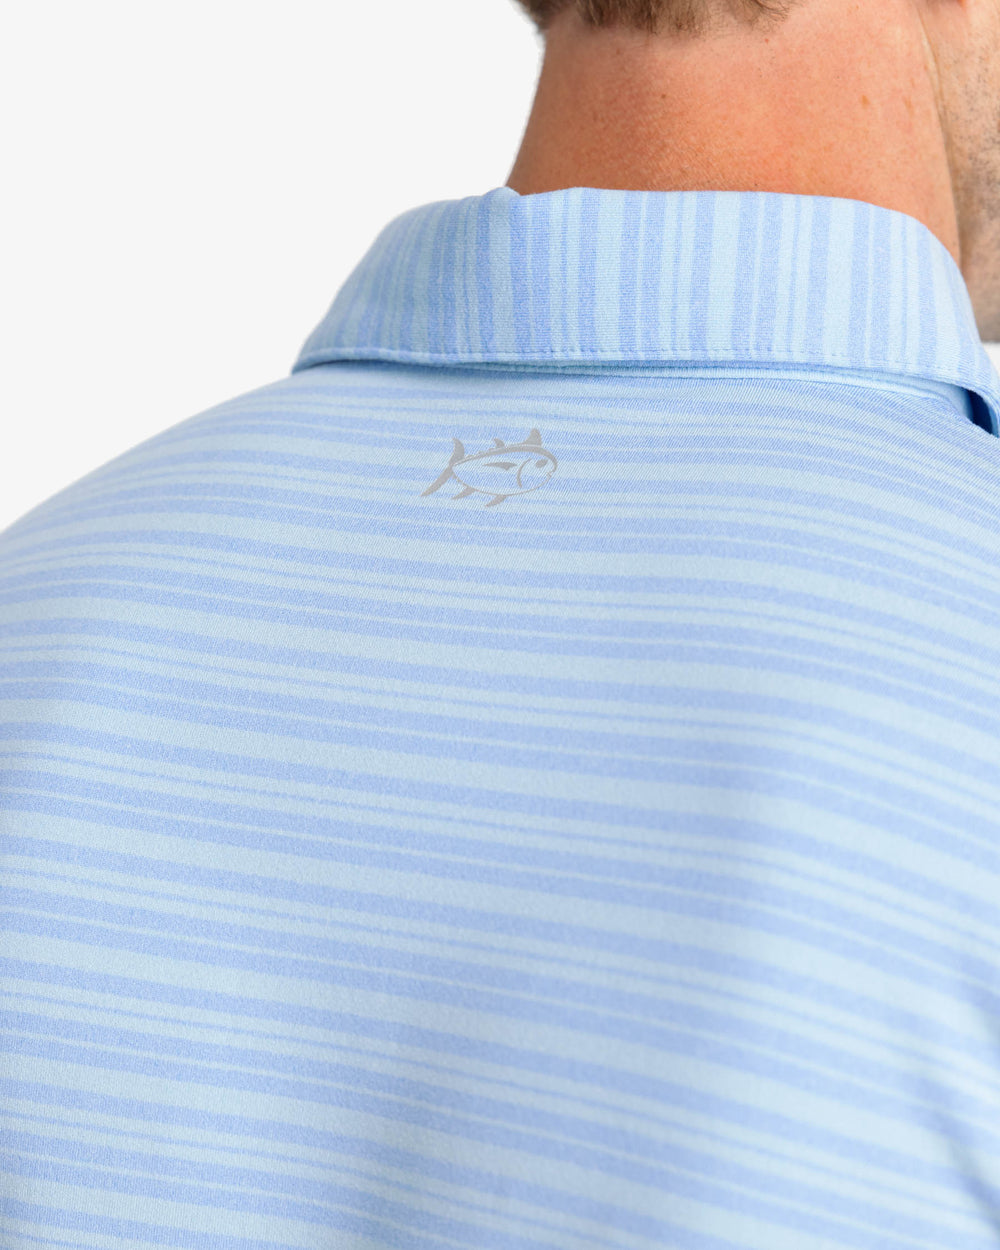 The yoke view of the Southern Tide Ryder Heather Bombay Striped Polo Shirt by Southern Tide - Heather Boat Blue